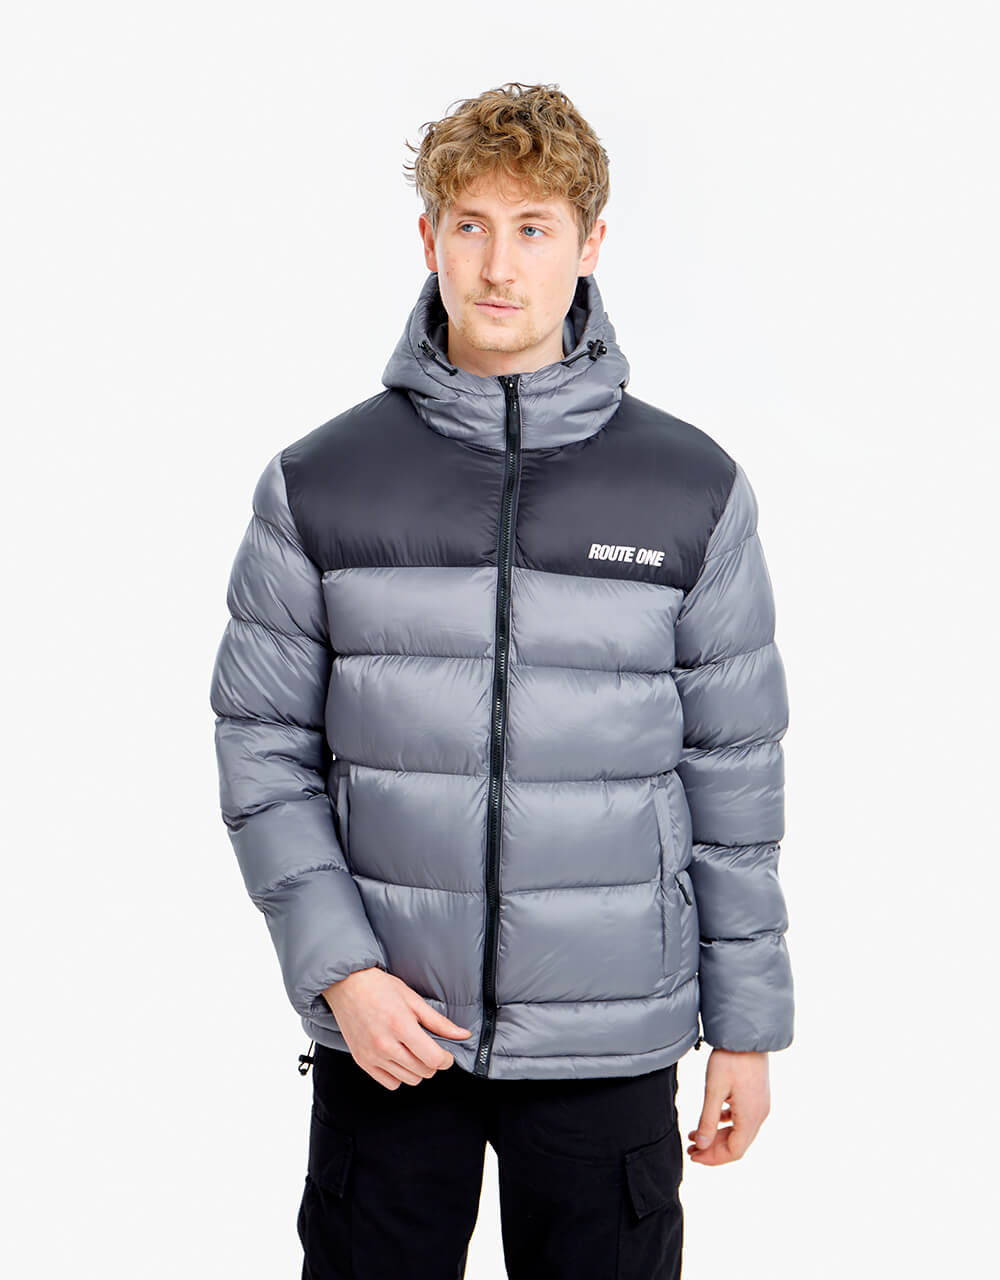 Route One Vostok Hooded Puffer Jacket - Charcoal/Black